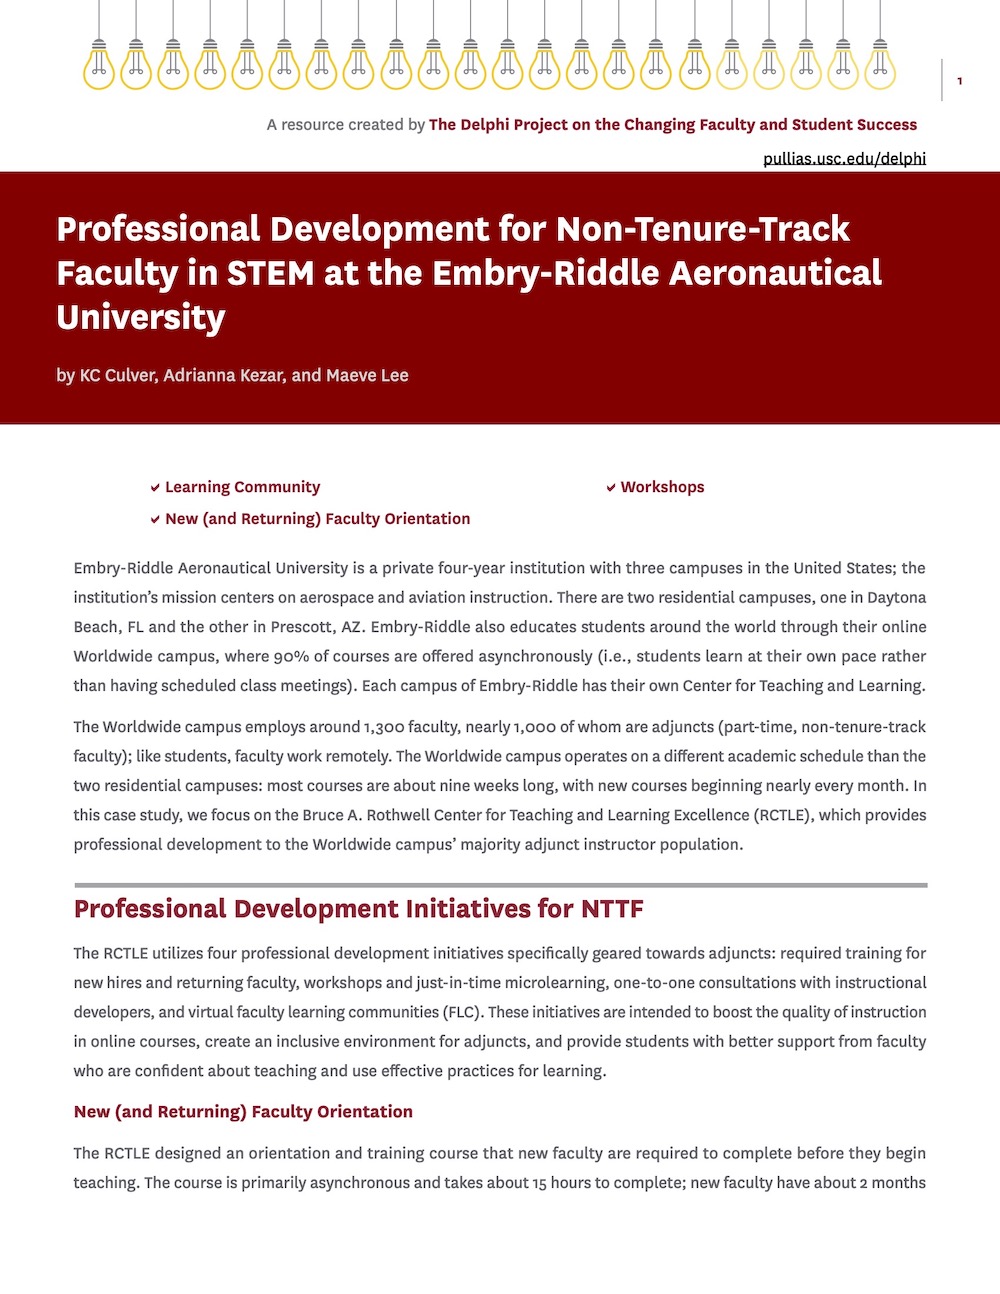 Professional Development for Non-Tenure-Track Faculty in STEM at the Embry-Riddle Aeronautical University